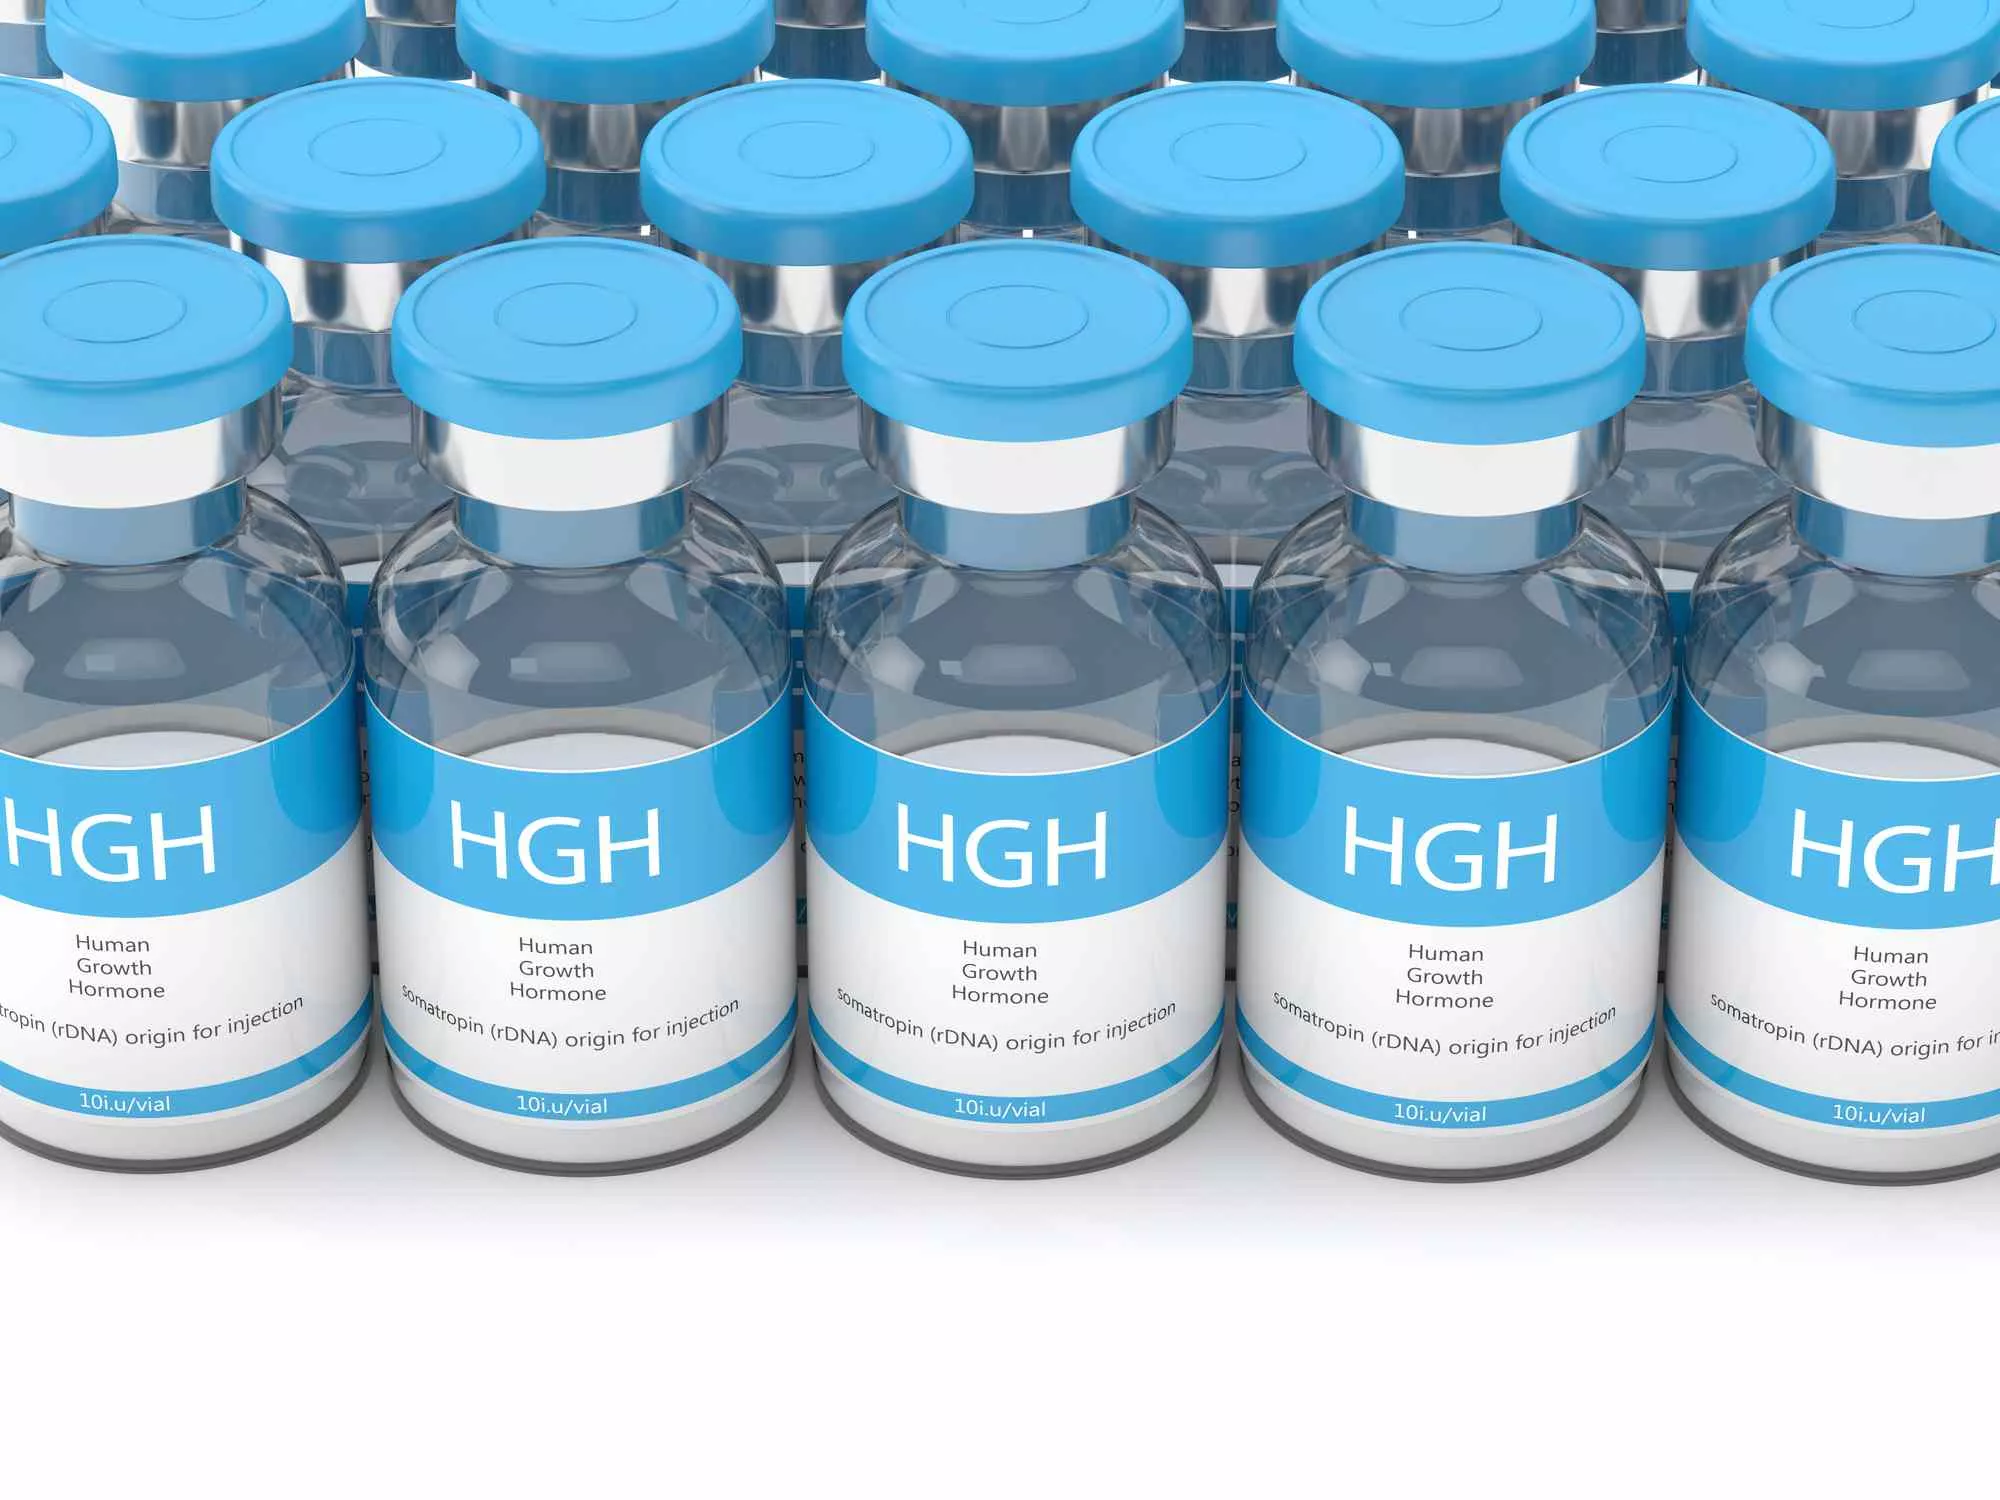 Human Growth Hormone (HGH) Injection | PULSE CLINIC - Asia's Leading Sexual Healthcare Network.